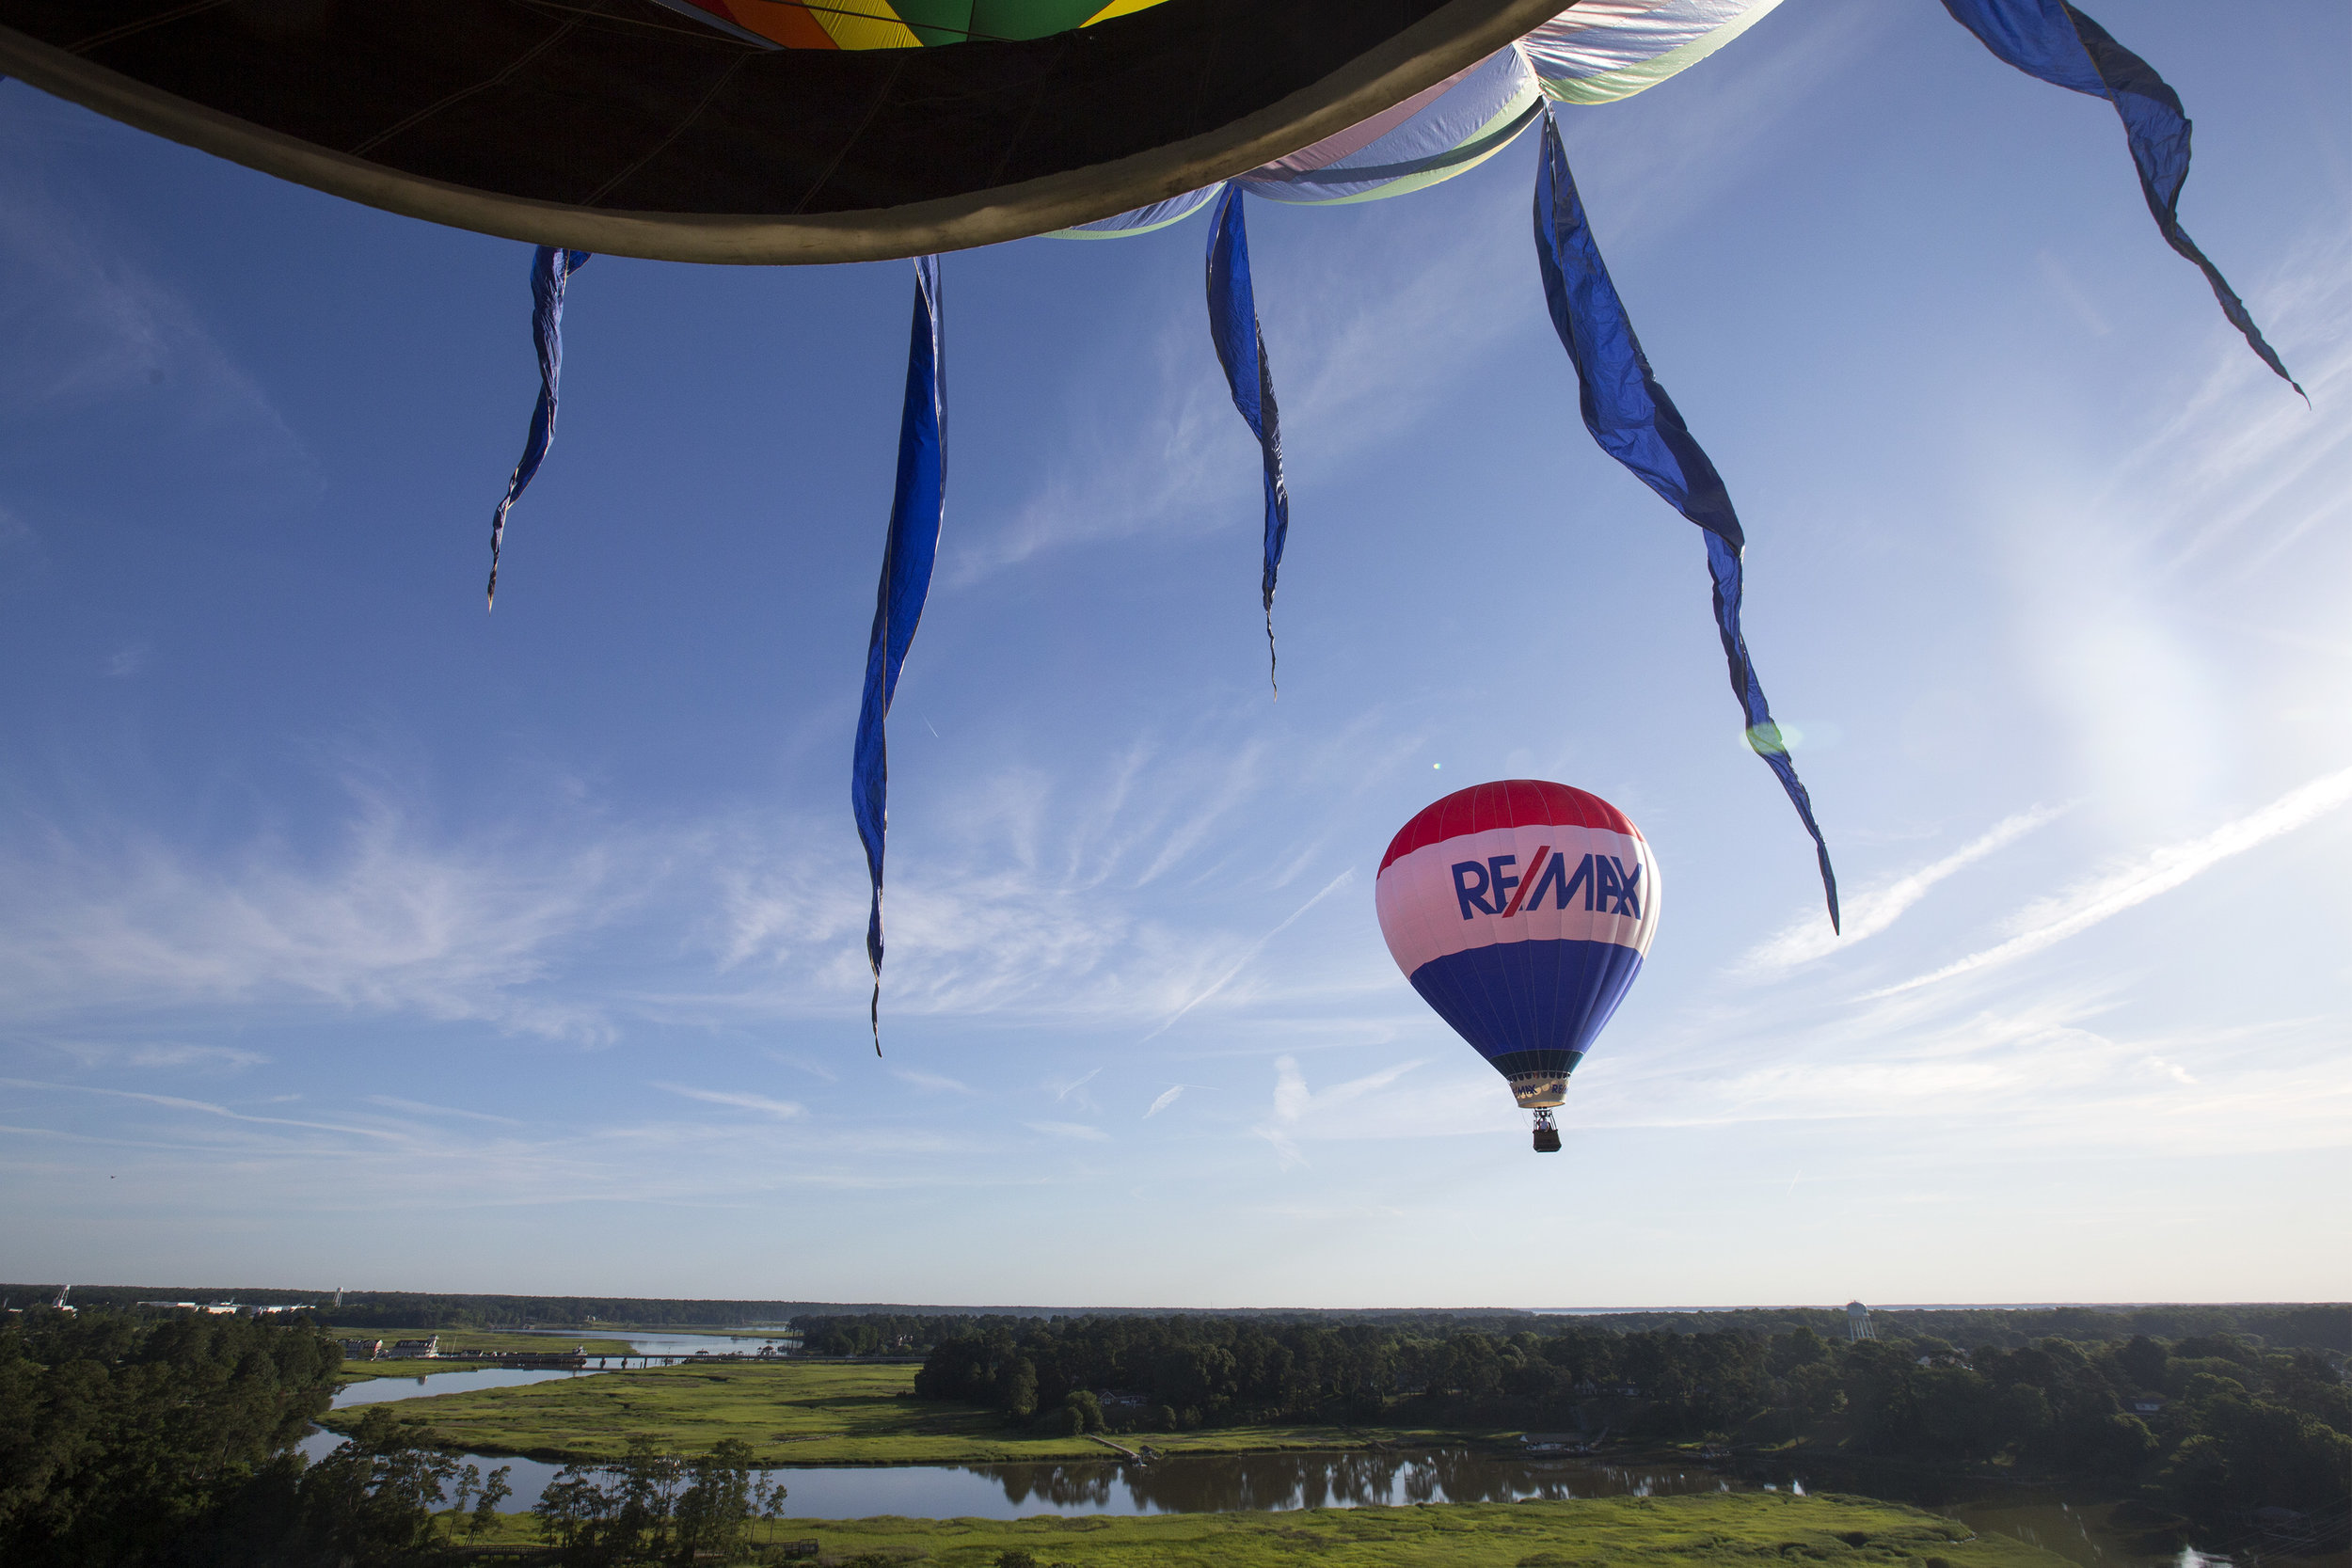  A RE/MAX balloon flies over Smithfield during an early morning flight on June 4, 2019. 